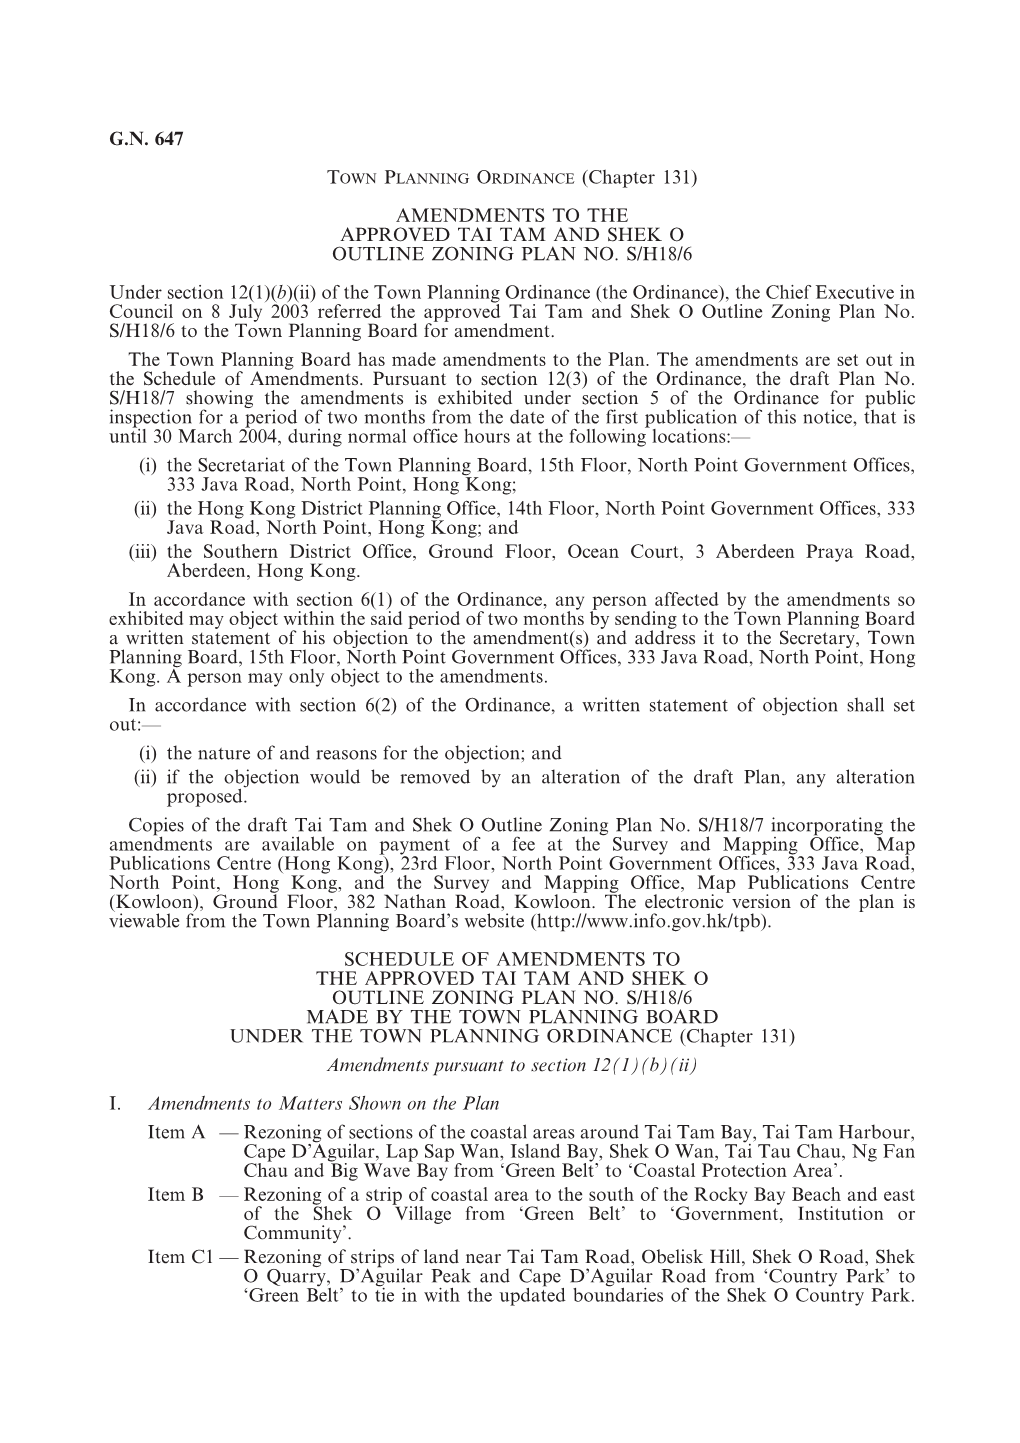 G.N. 647 TOWN PLANNING ORDINANCE (Chapter 131) AMENDMENTS to the APPROVED TAI TAM and SHEK O OUTLINE ZONING PLAN NO. S/H18/6